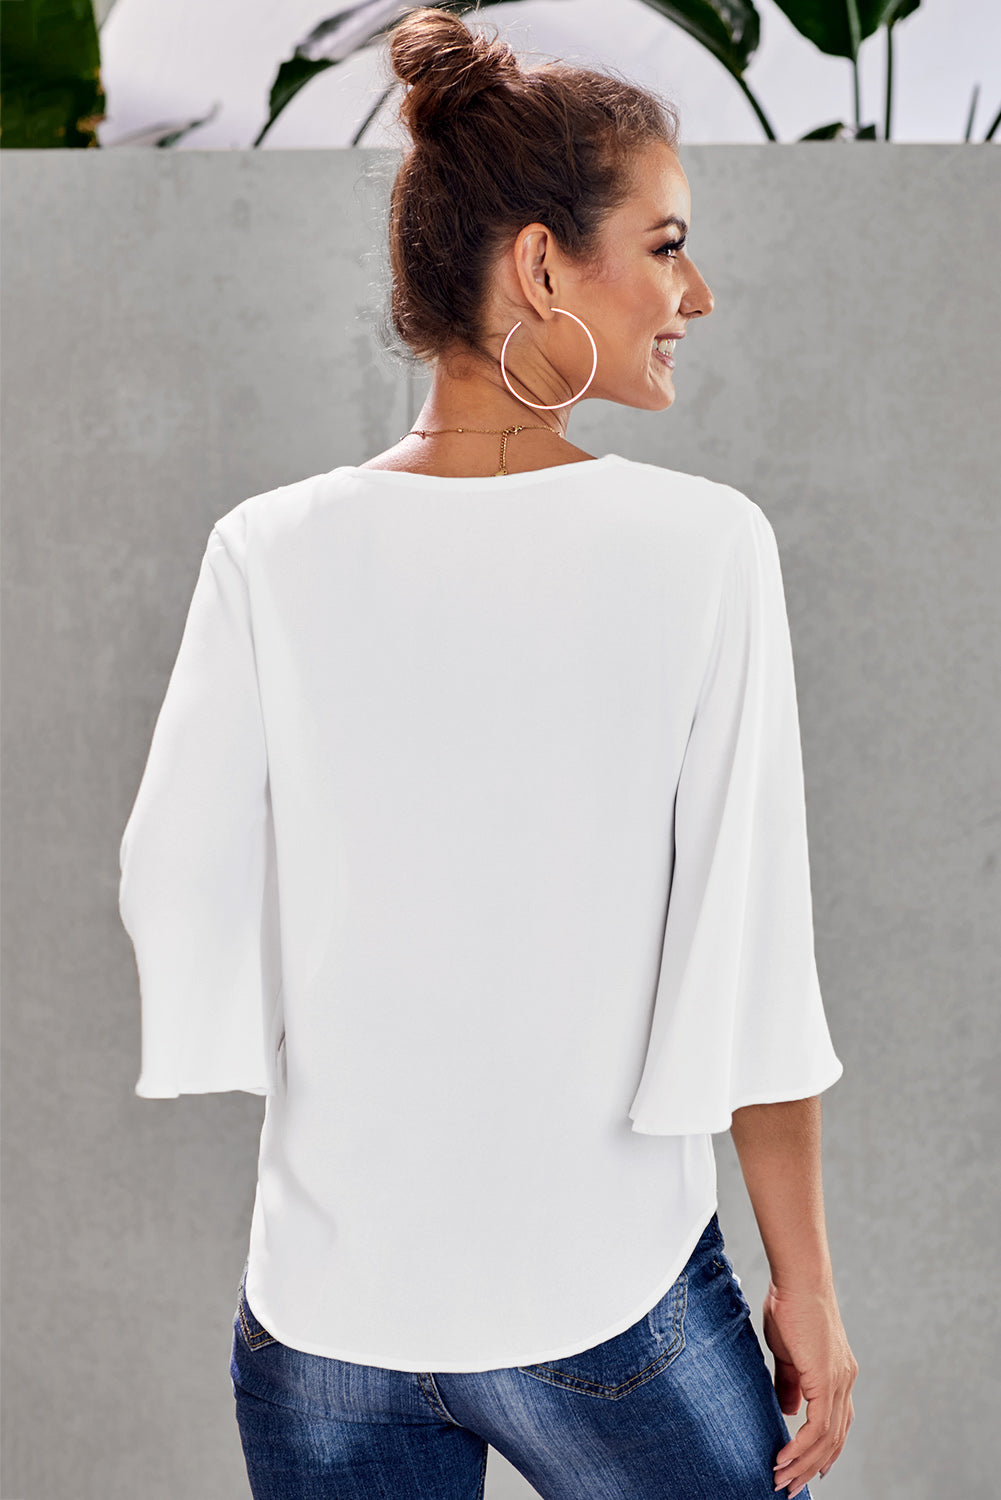 Chic White V Neck Flare Sleeve Button Tie Blouse Top